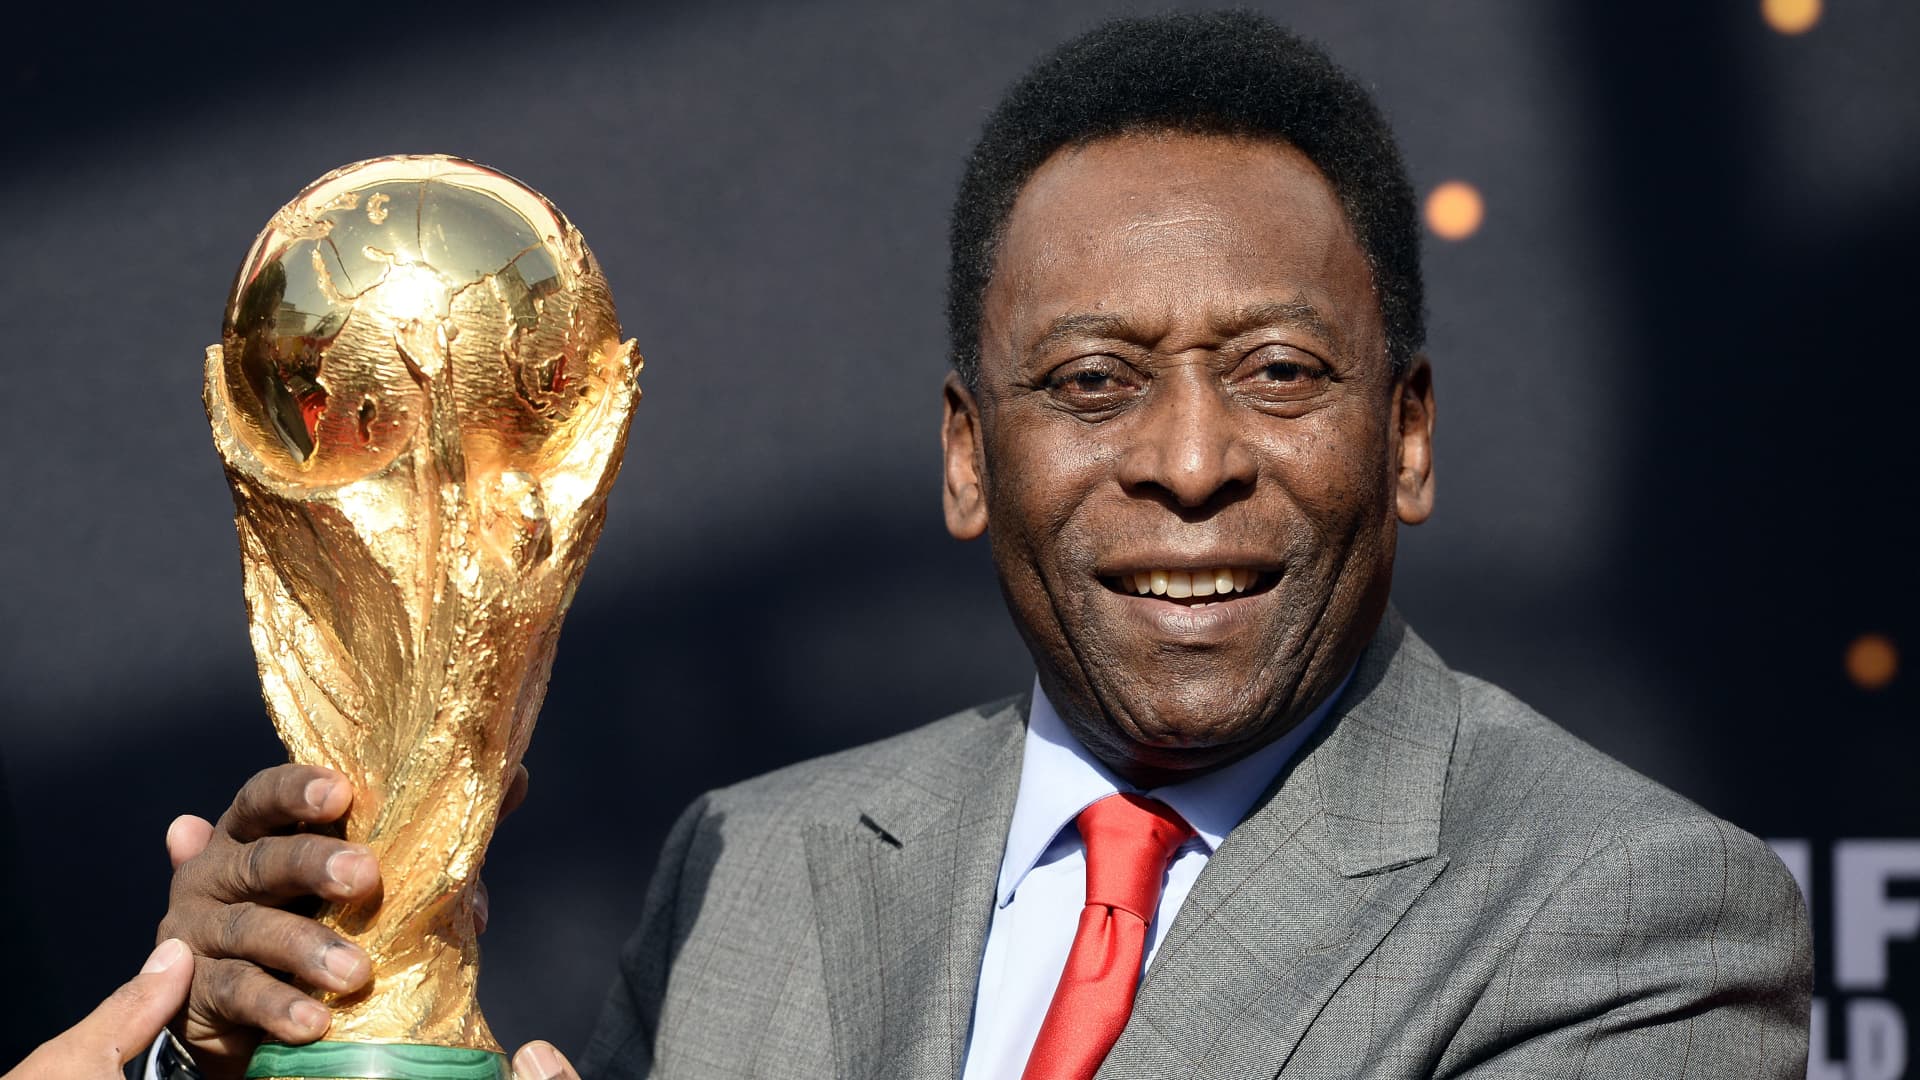 Pelé, Brazilian soccer star and only player to win the World Cup three times, di..